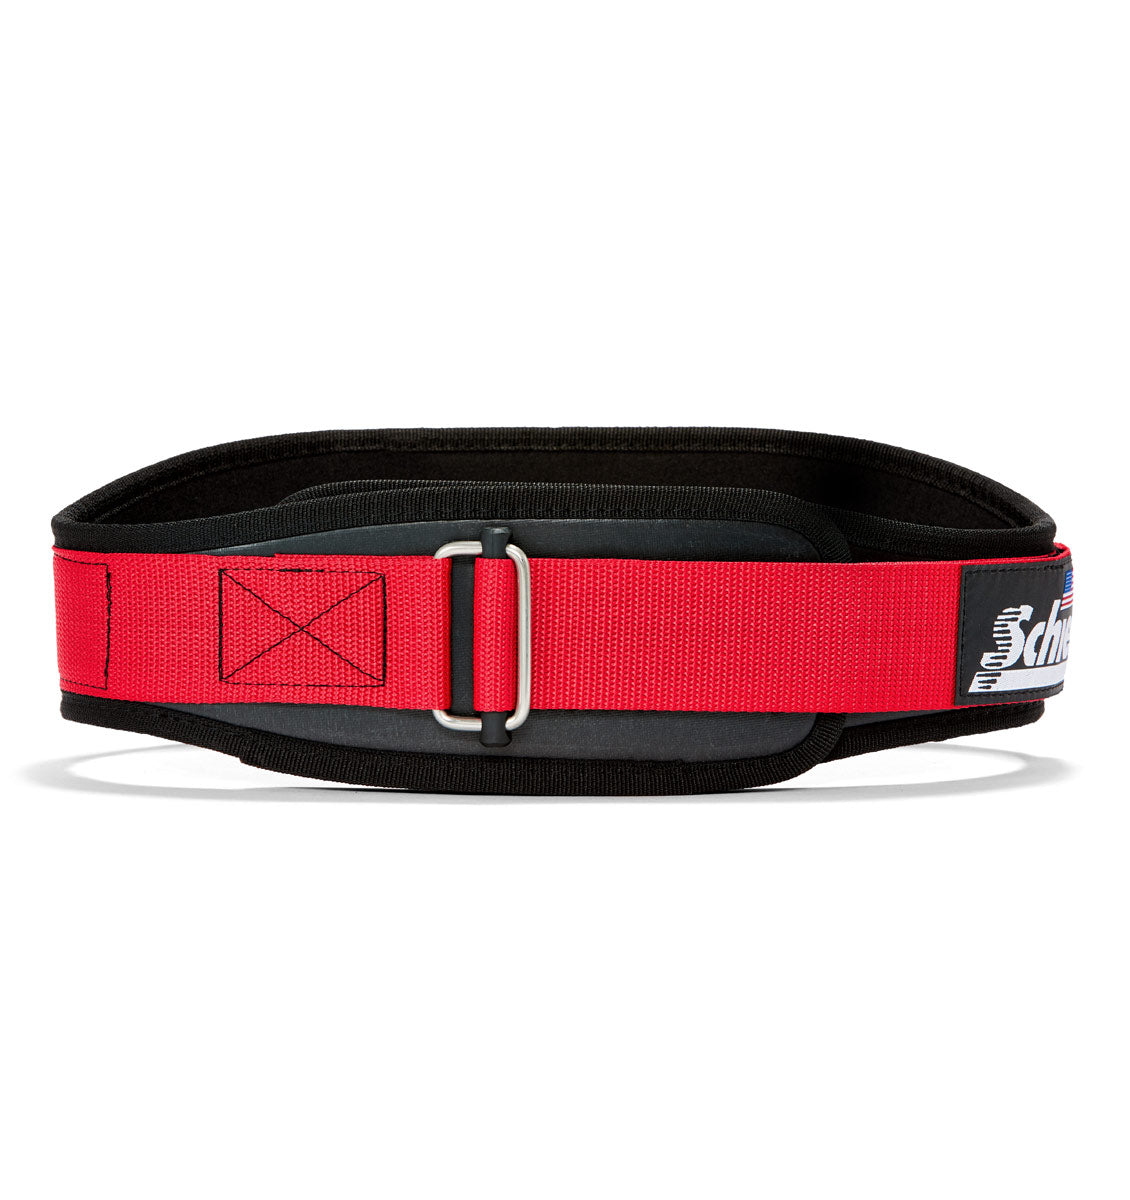 3004 Schiek Contour Power Weight Lifting Belt Black and Red Front